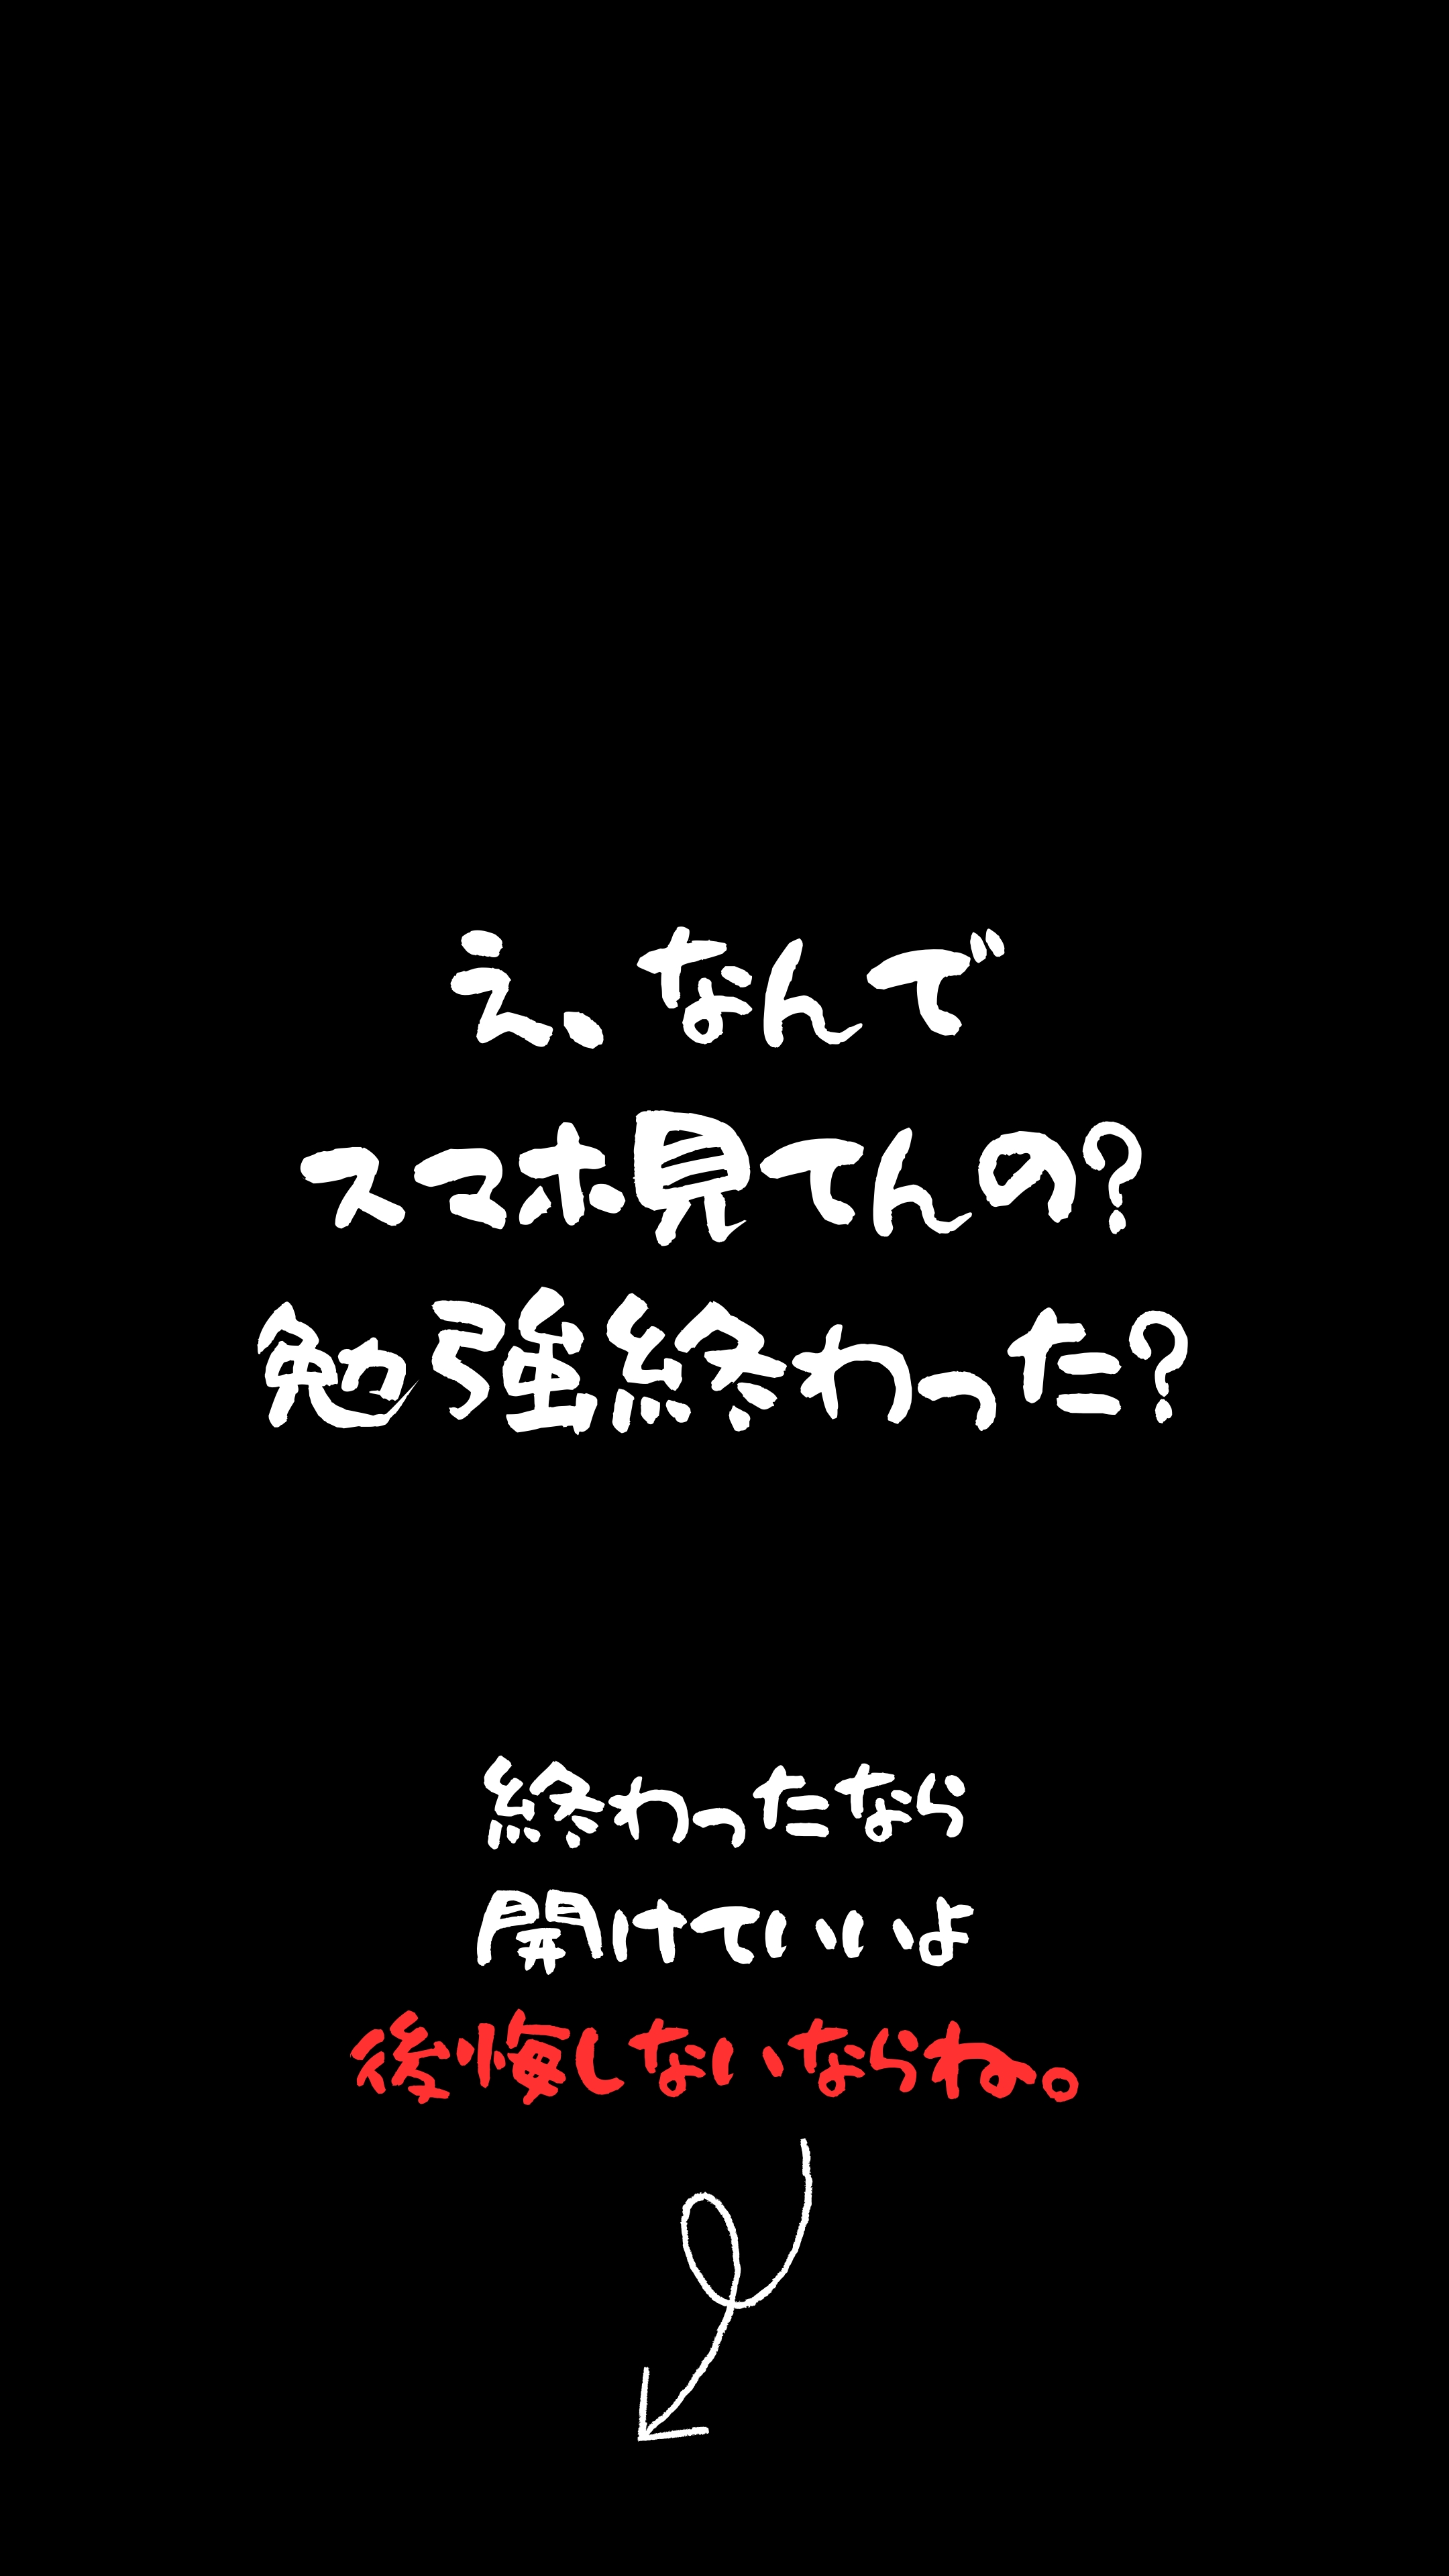 Mysterious Handwritten Japanese Question on Black Tapet[5ae7481a6d774cc0a166]